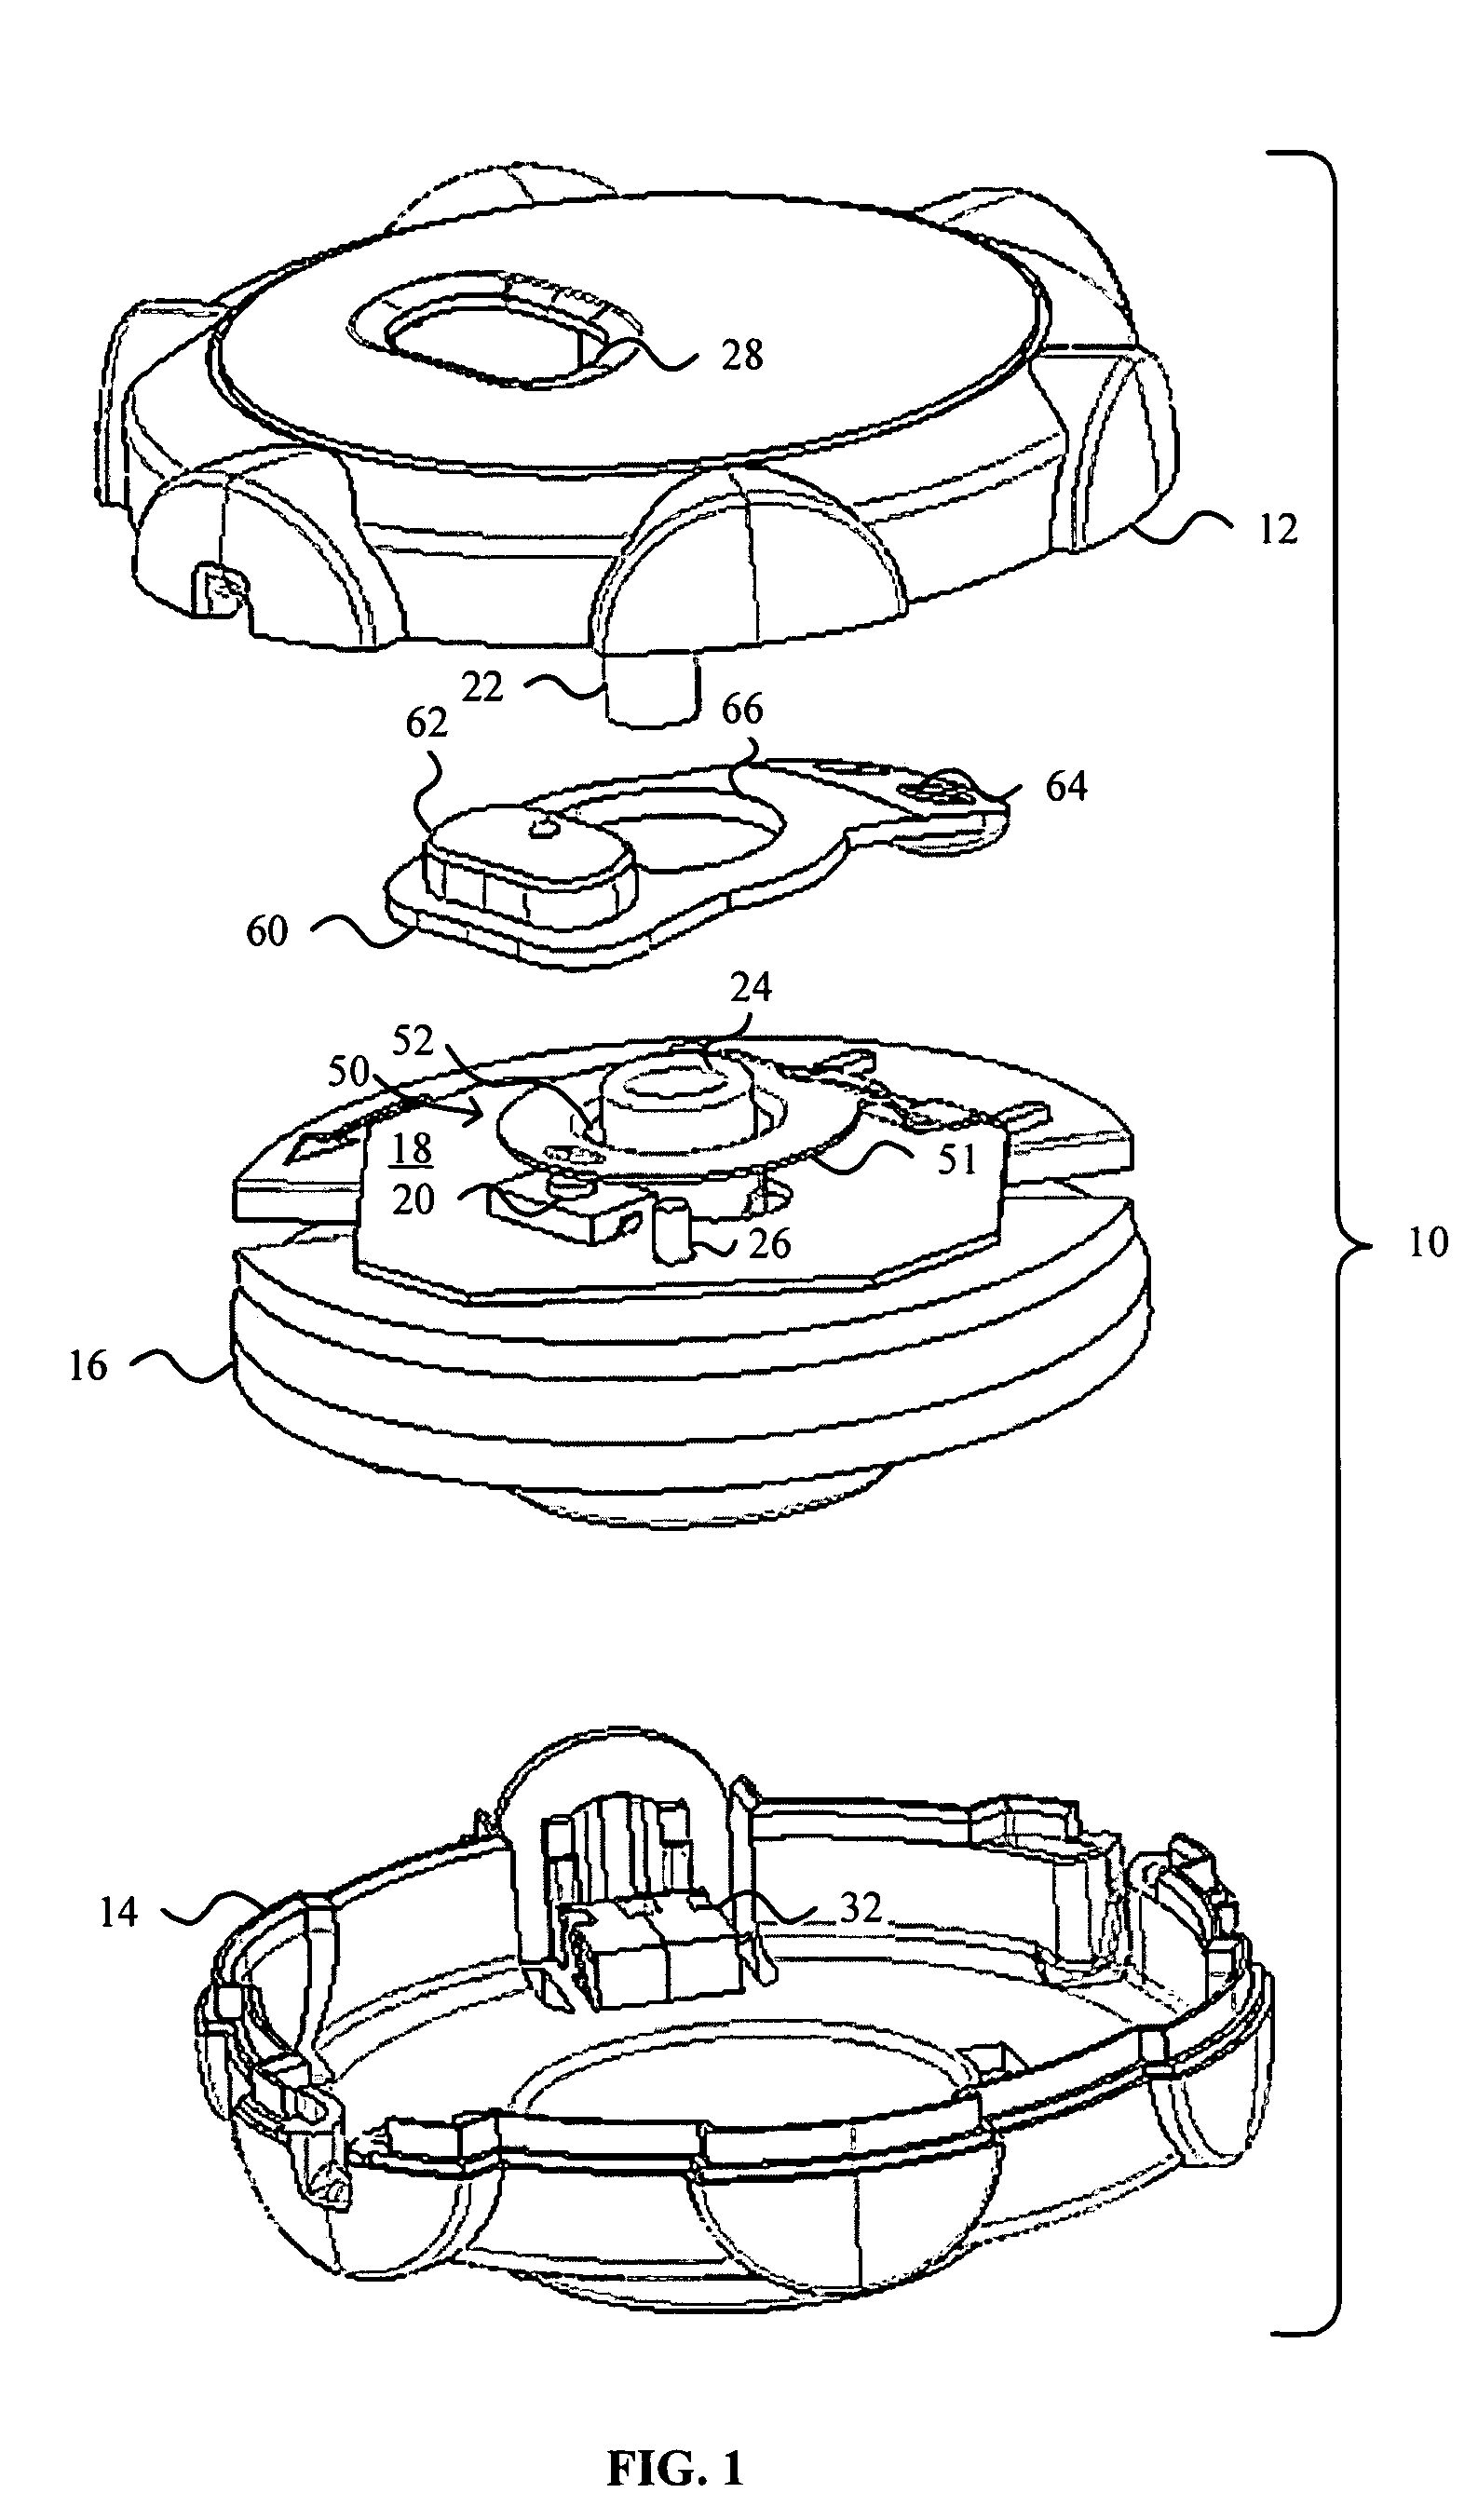 Cable winding device with clocked keycap and revolving electrical switch